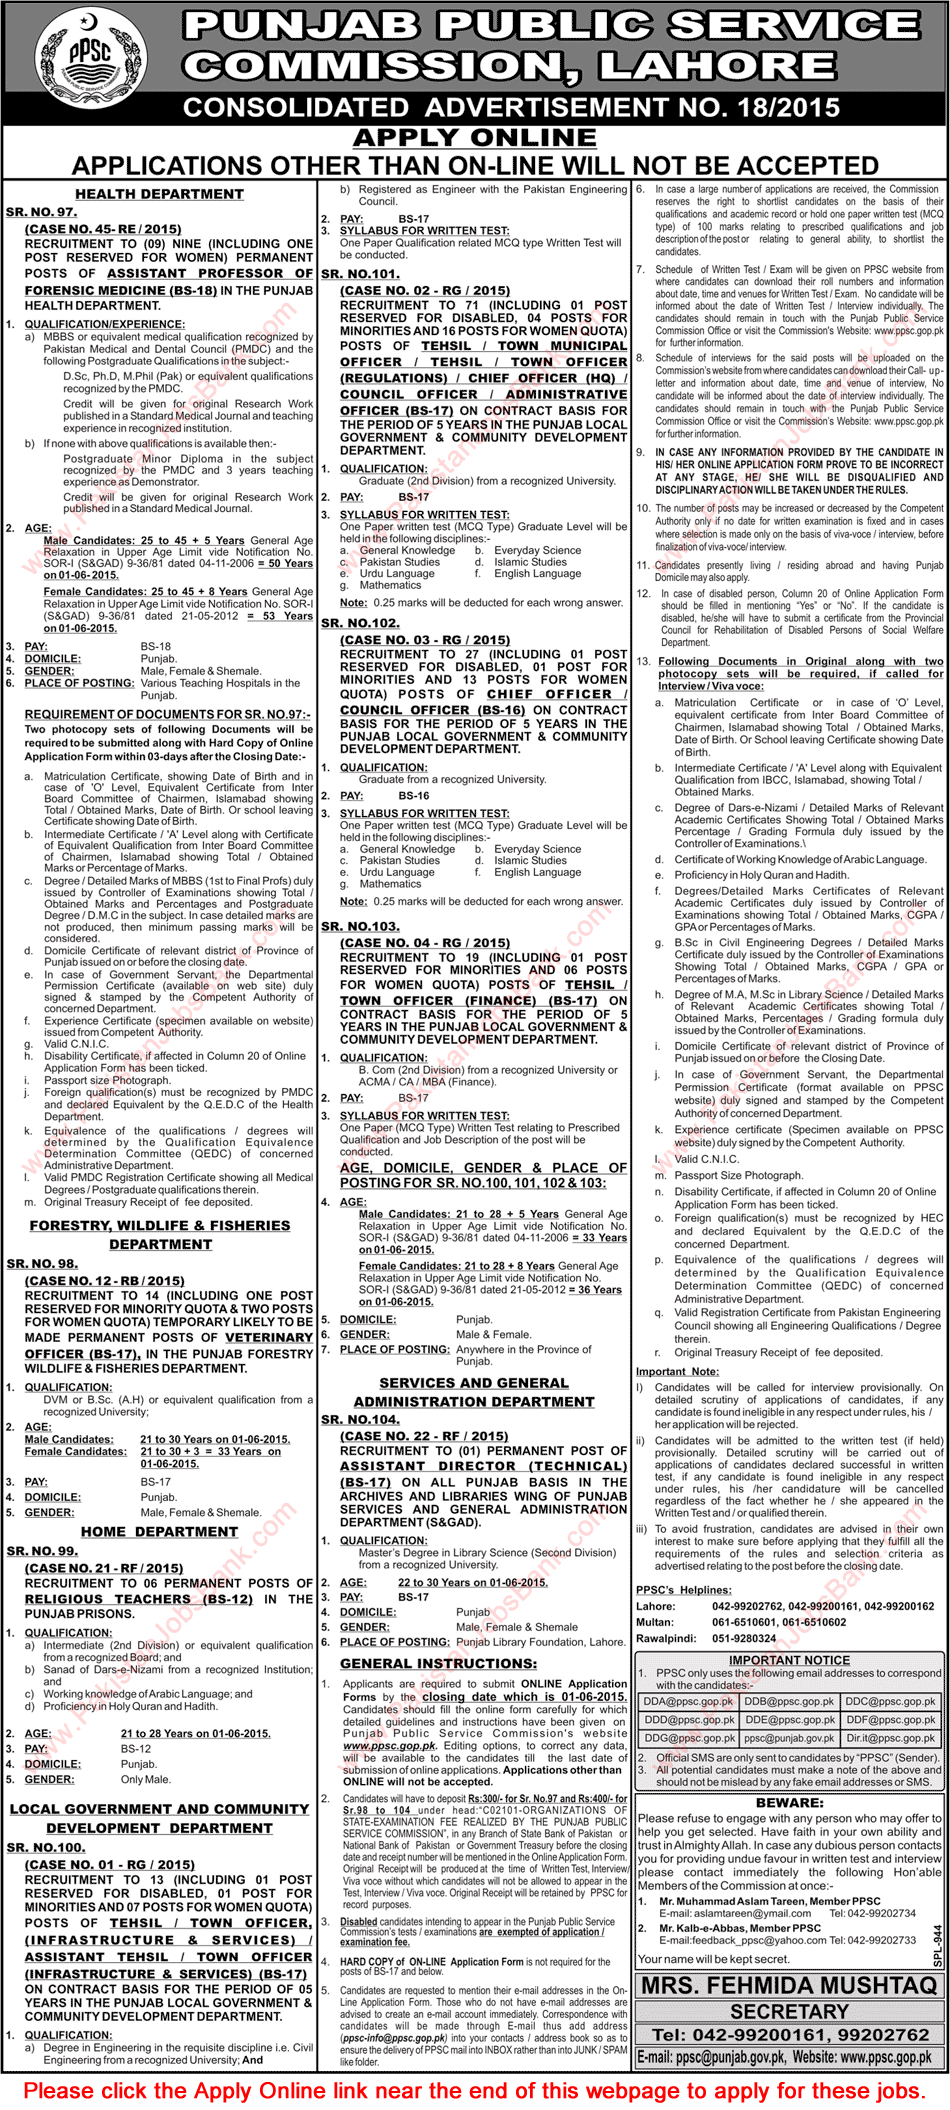 Punjab Public Service Commission Jobs May 2015 Consolidated Advertisement No 18/2015 Latest